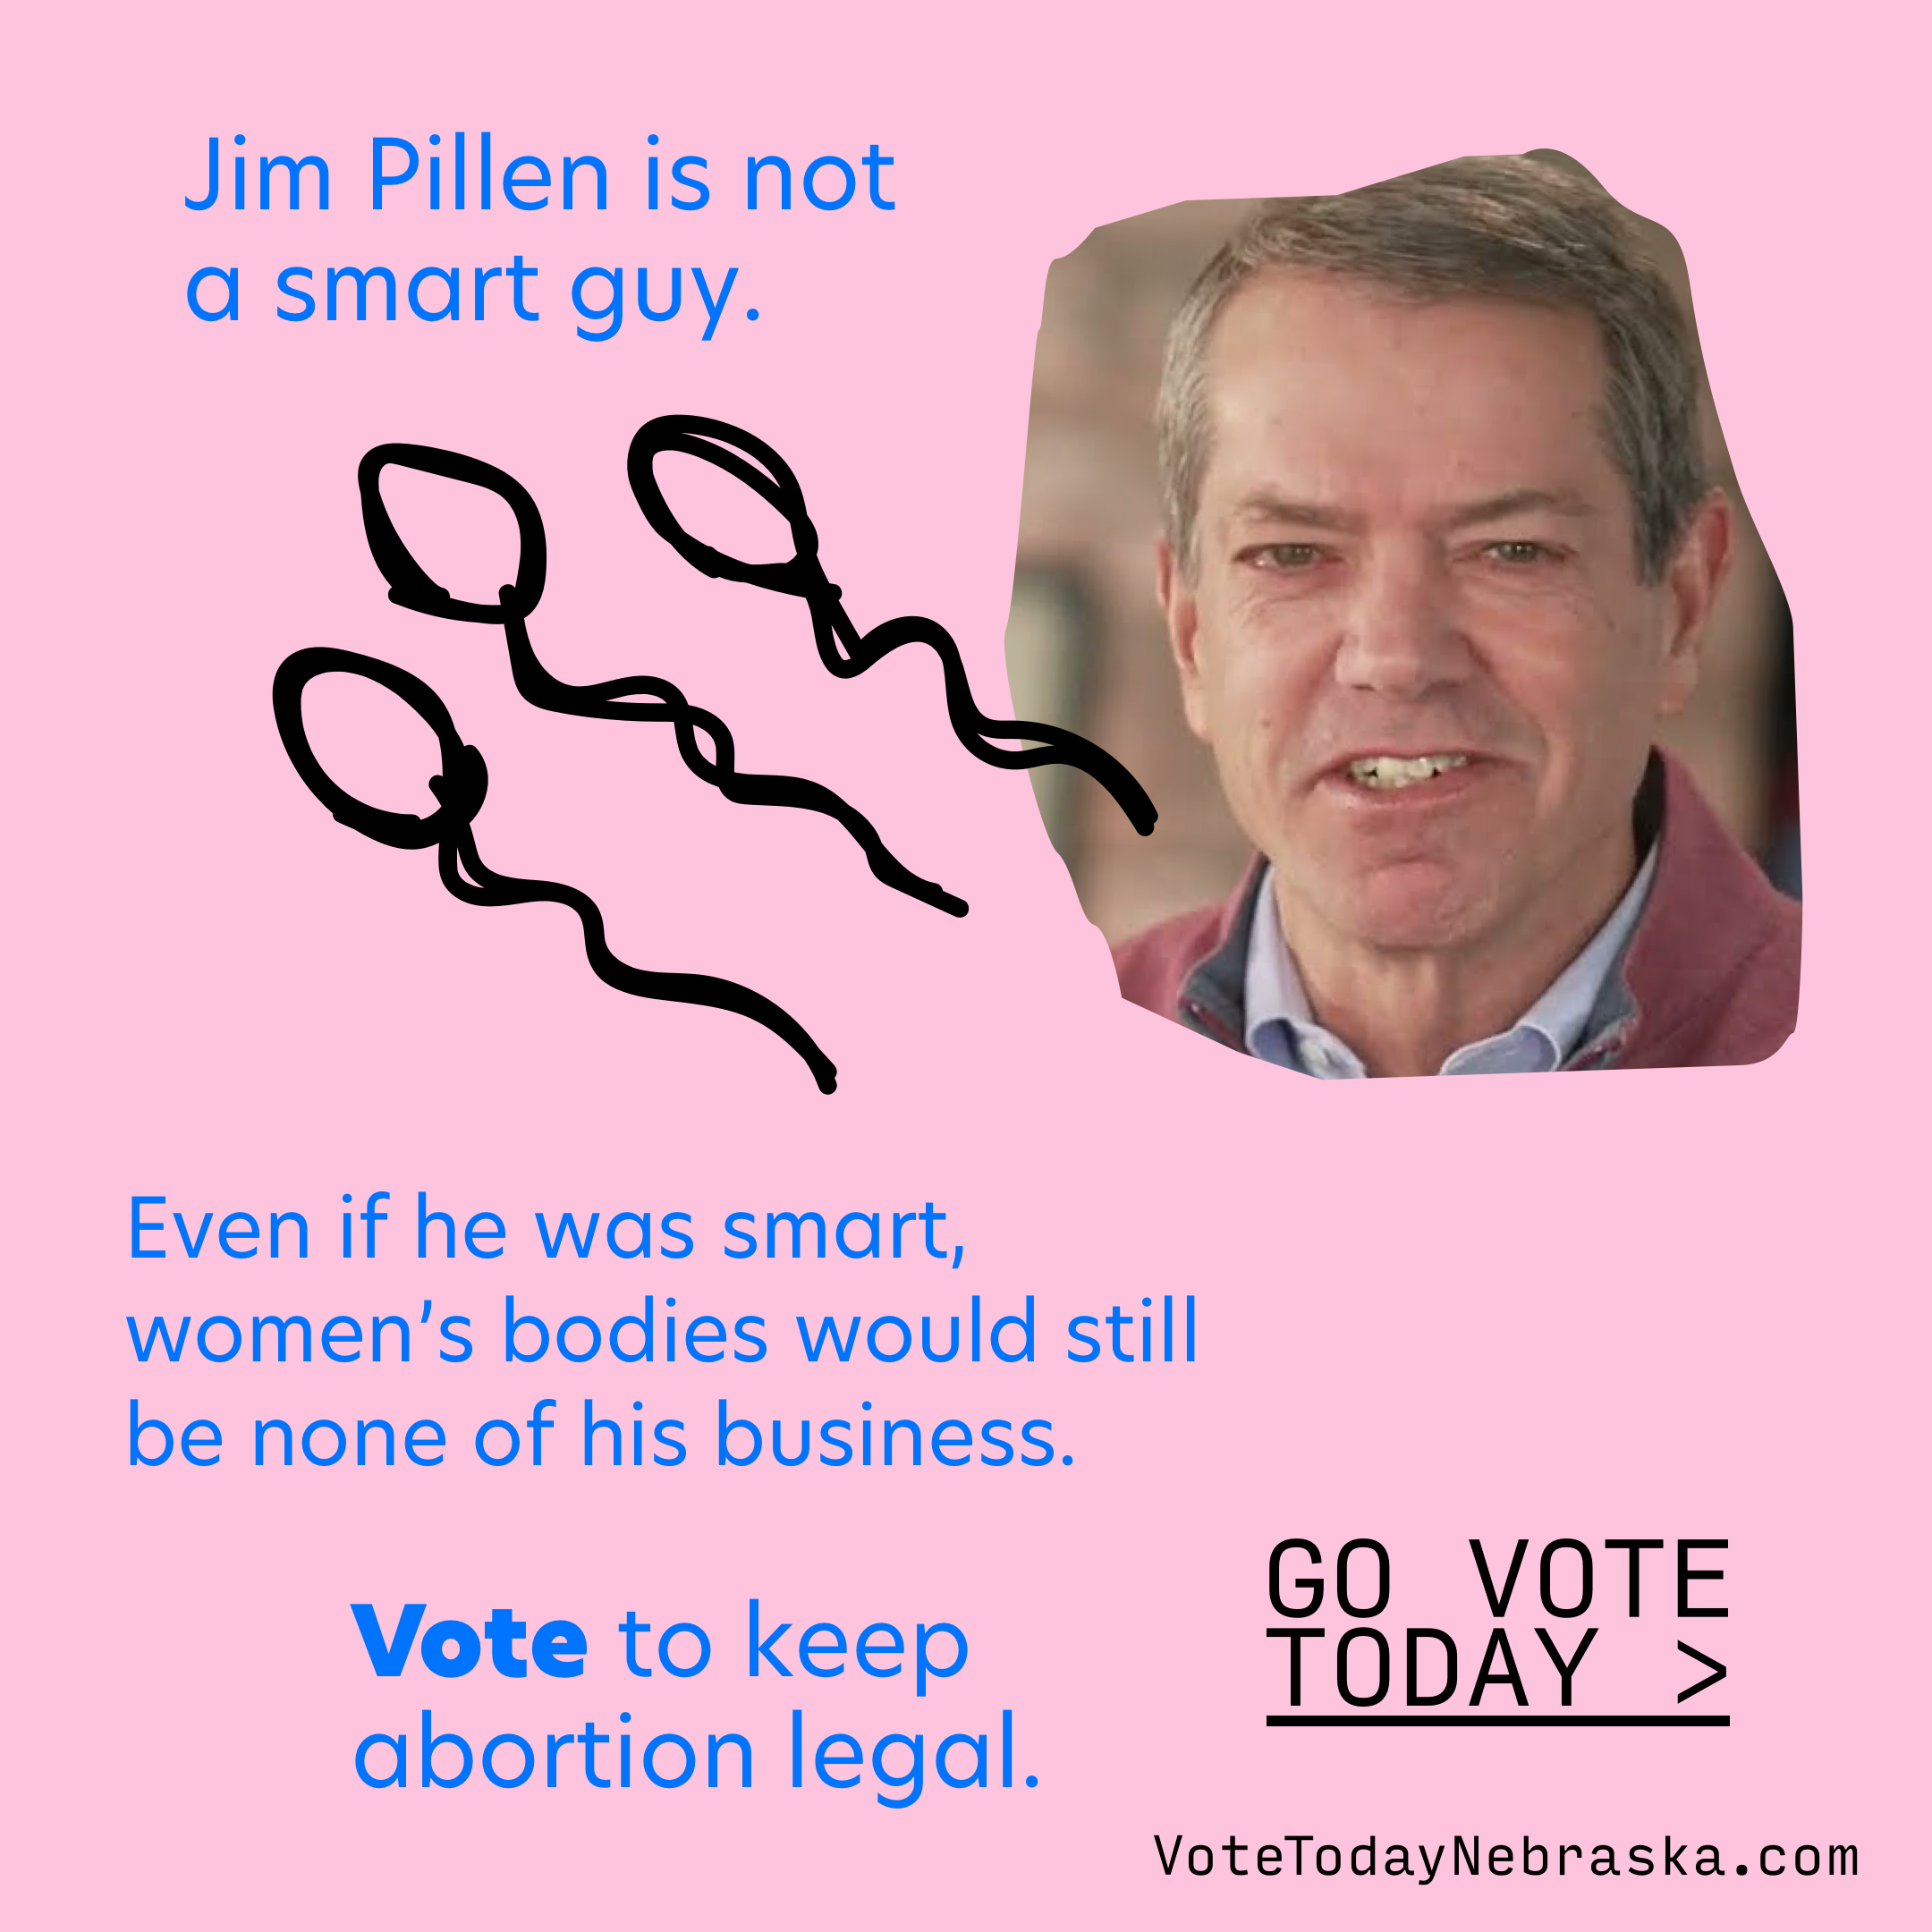 Jim Pillen next to drawings of sperm. Jim Pillen is not a smart guy. Even if he was smart, women's bodies would still be none of his business. Vote to keep abortion legal. Go Vote Today >